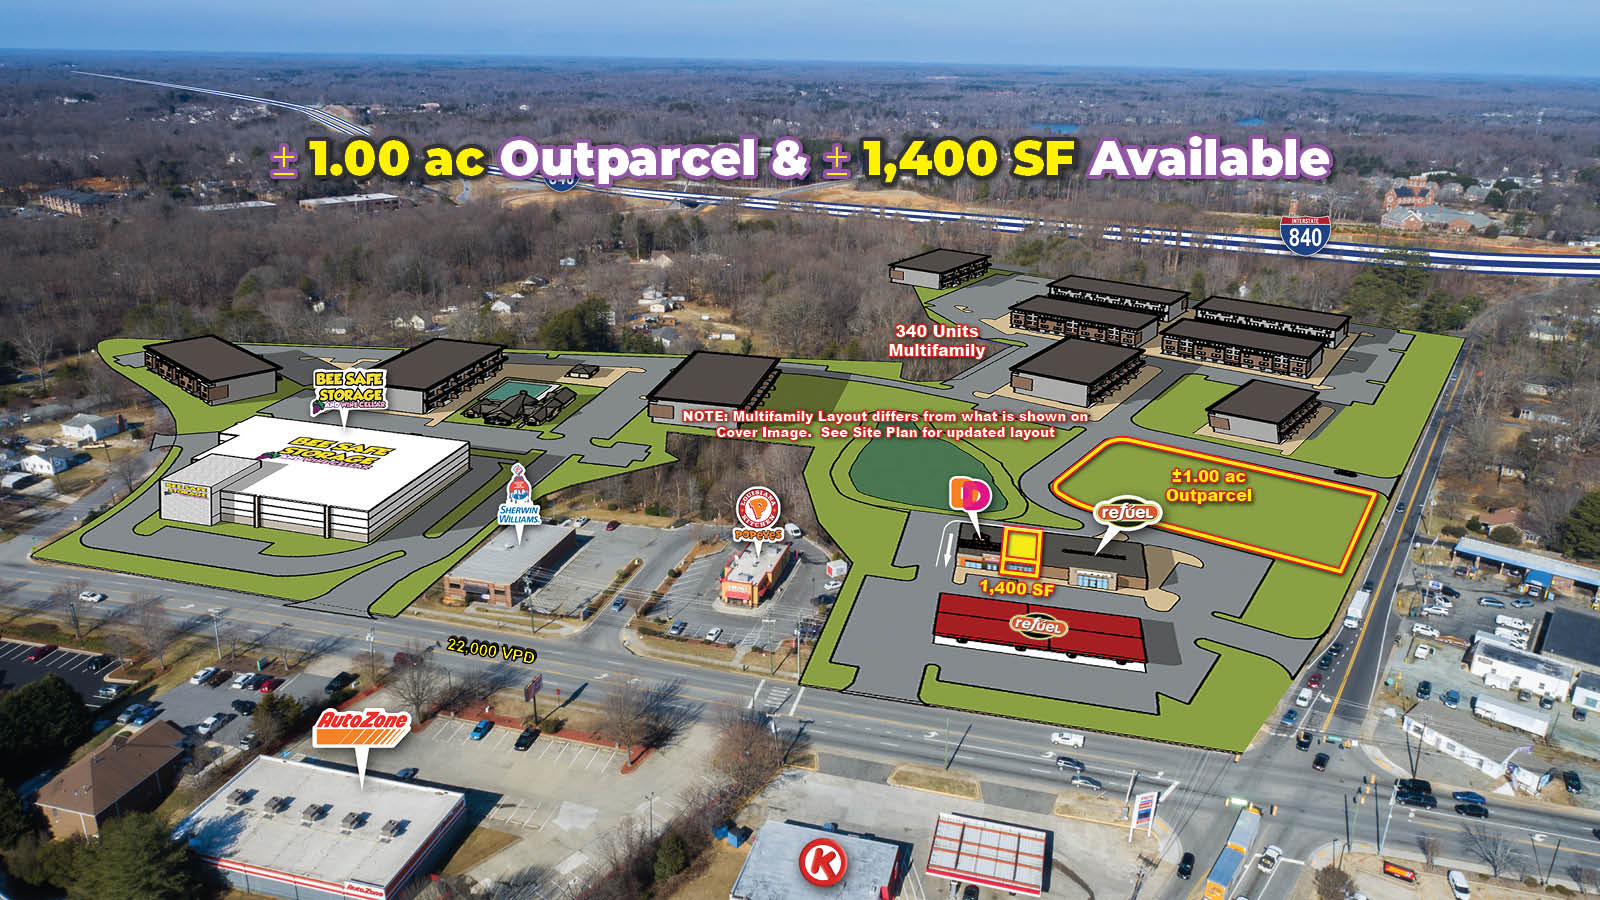 Commercial, For Lease, 1176, Ground Lease, Build to Suit, Greensboro, NC, North Carolina, New Development, New, Development, 2022, Dunkin\' Donuts, Rendering, Site Plan, Overlay